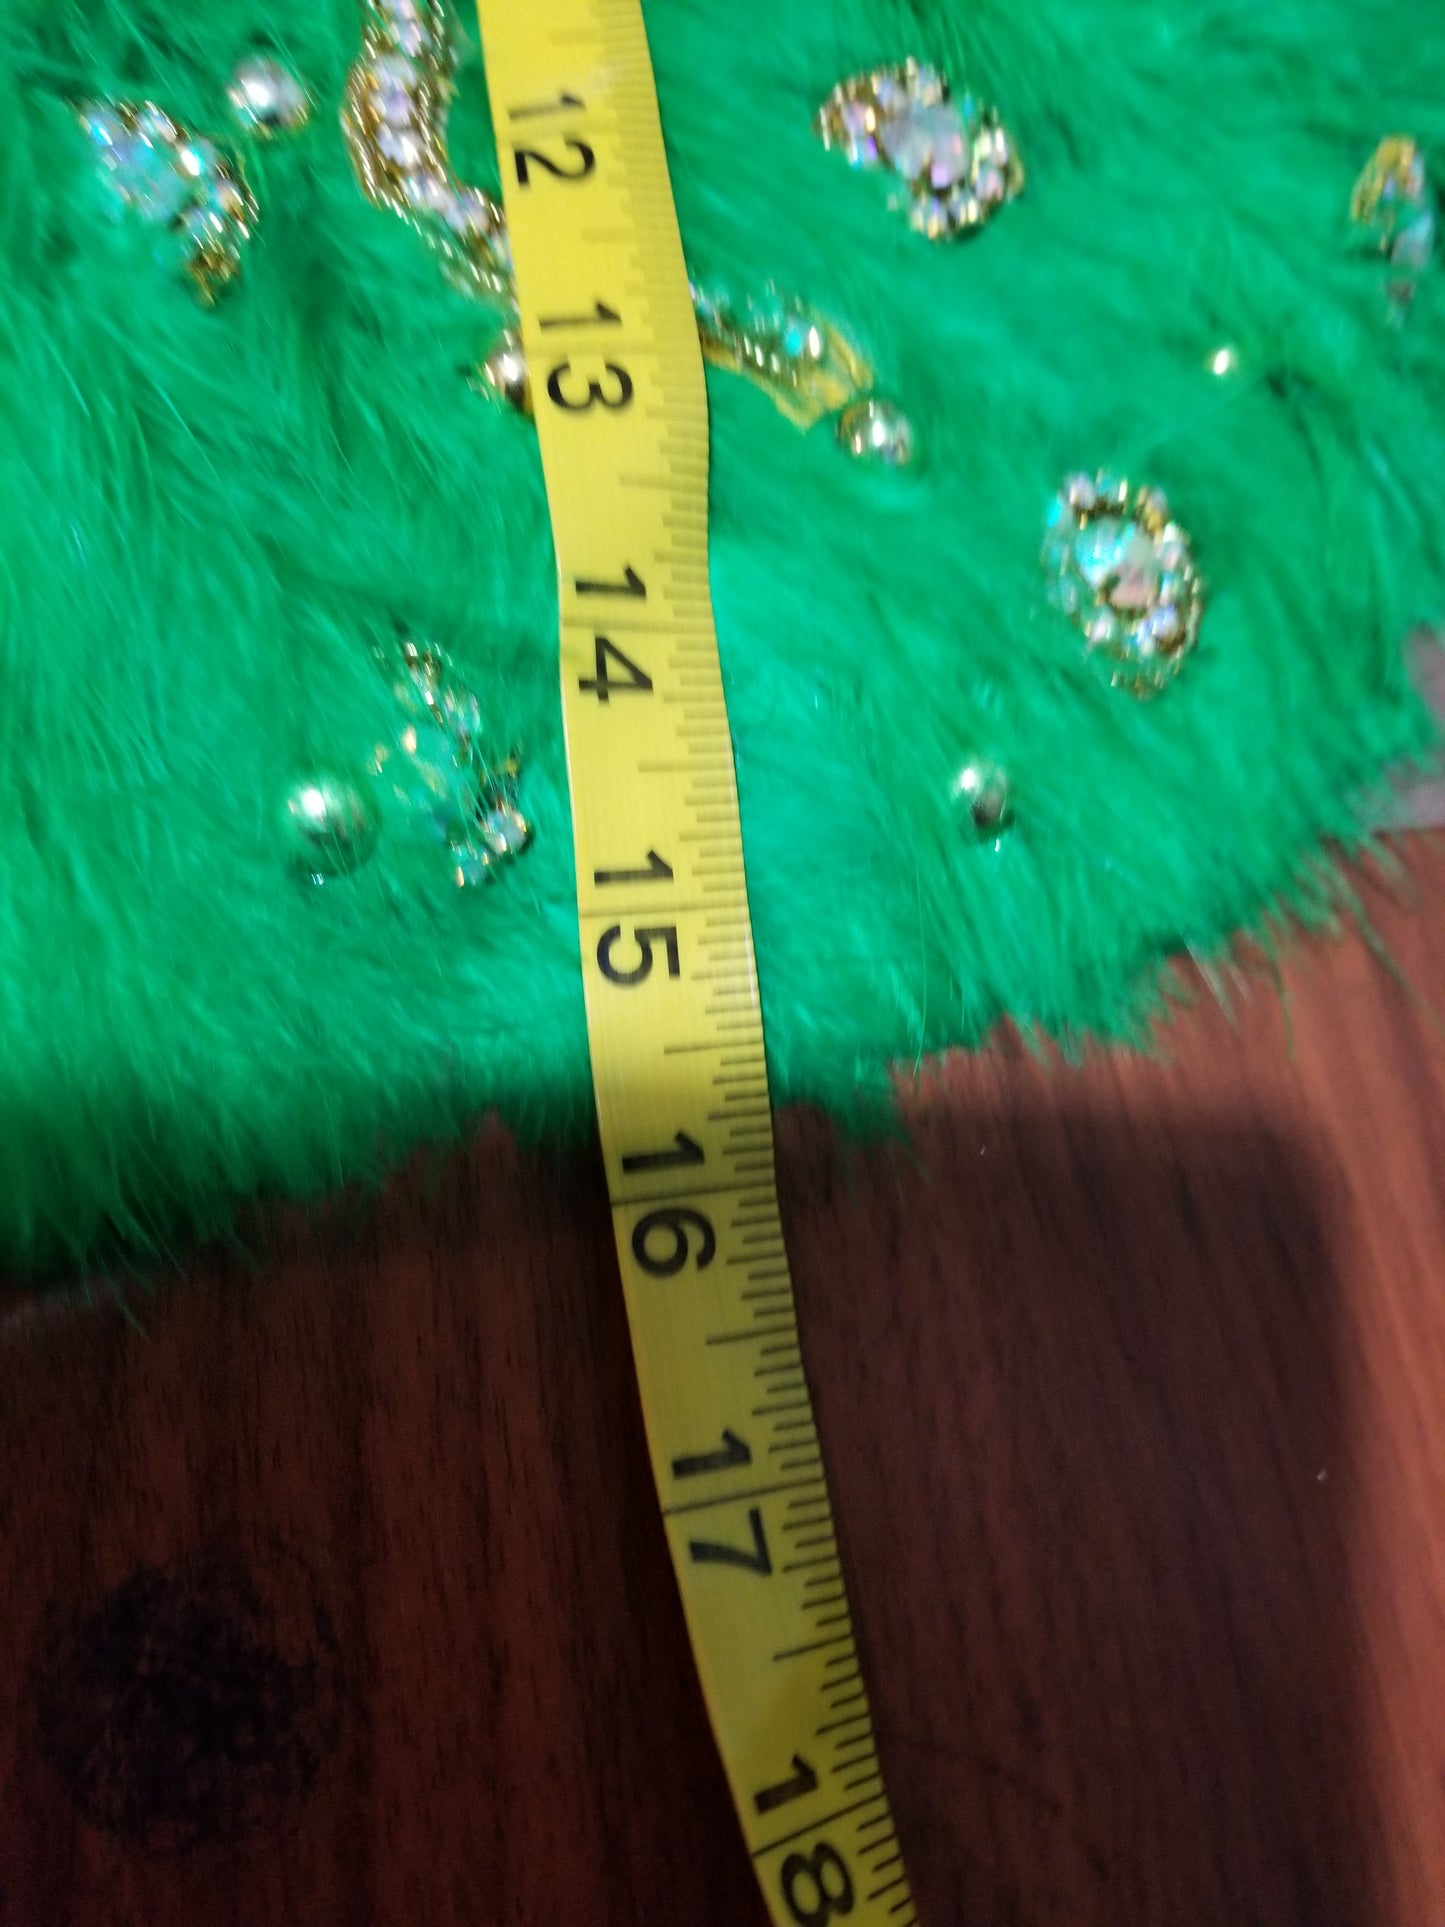 New arrival Green bead-dazzled feather hand fan. Nigerian Bridal accessories Feather hand fan. Long handle beaded and stoned. Size: Small feather in Green color